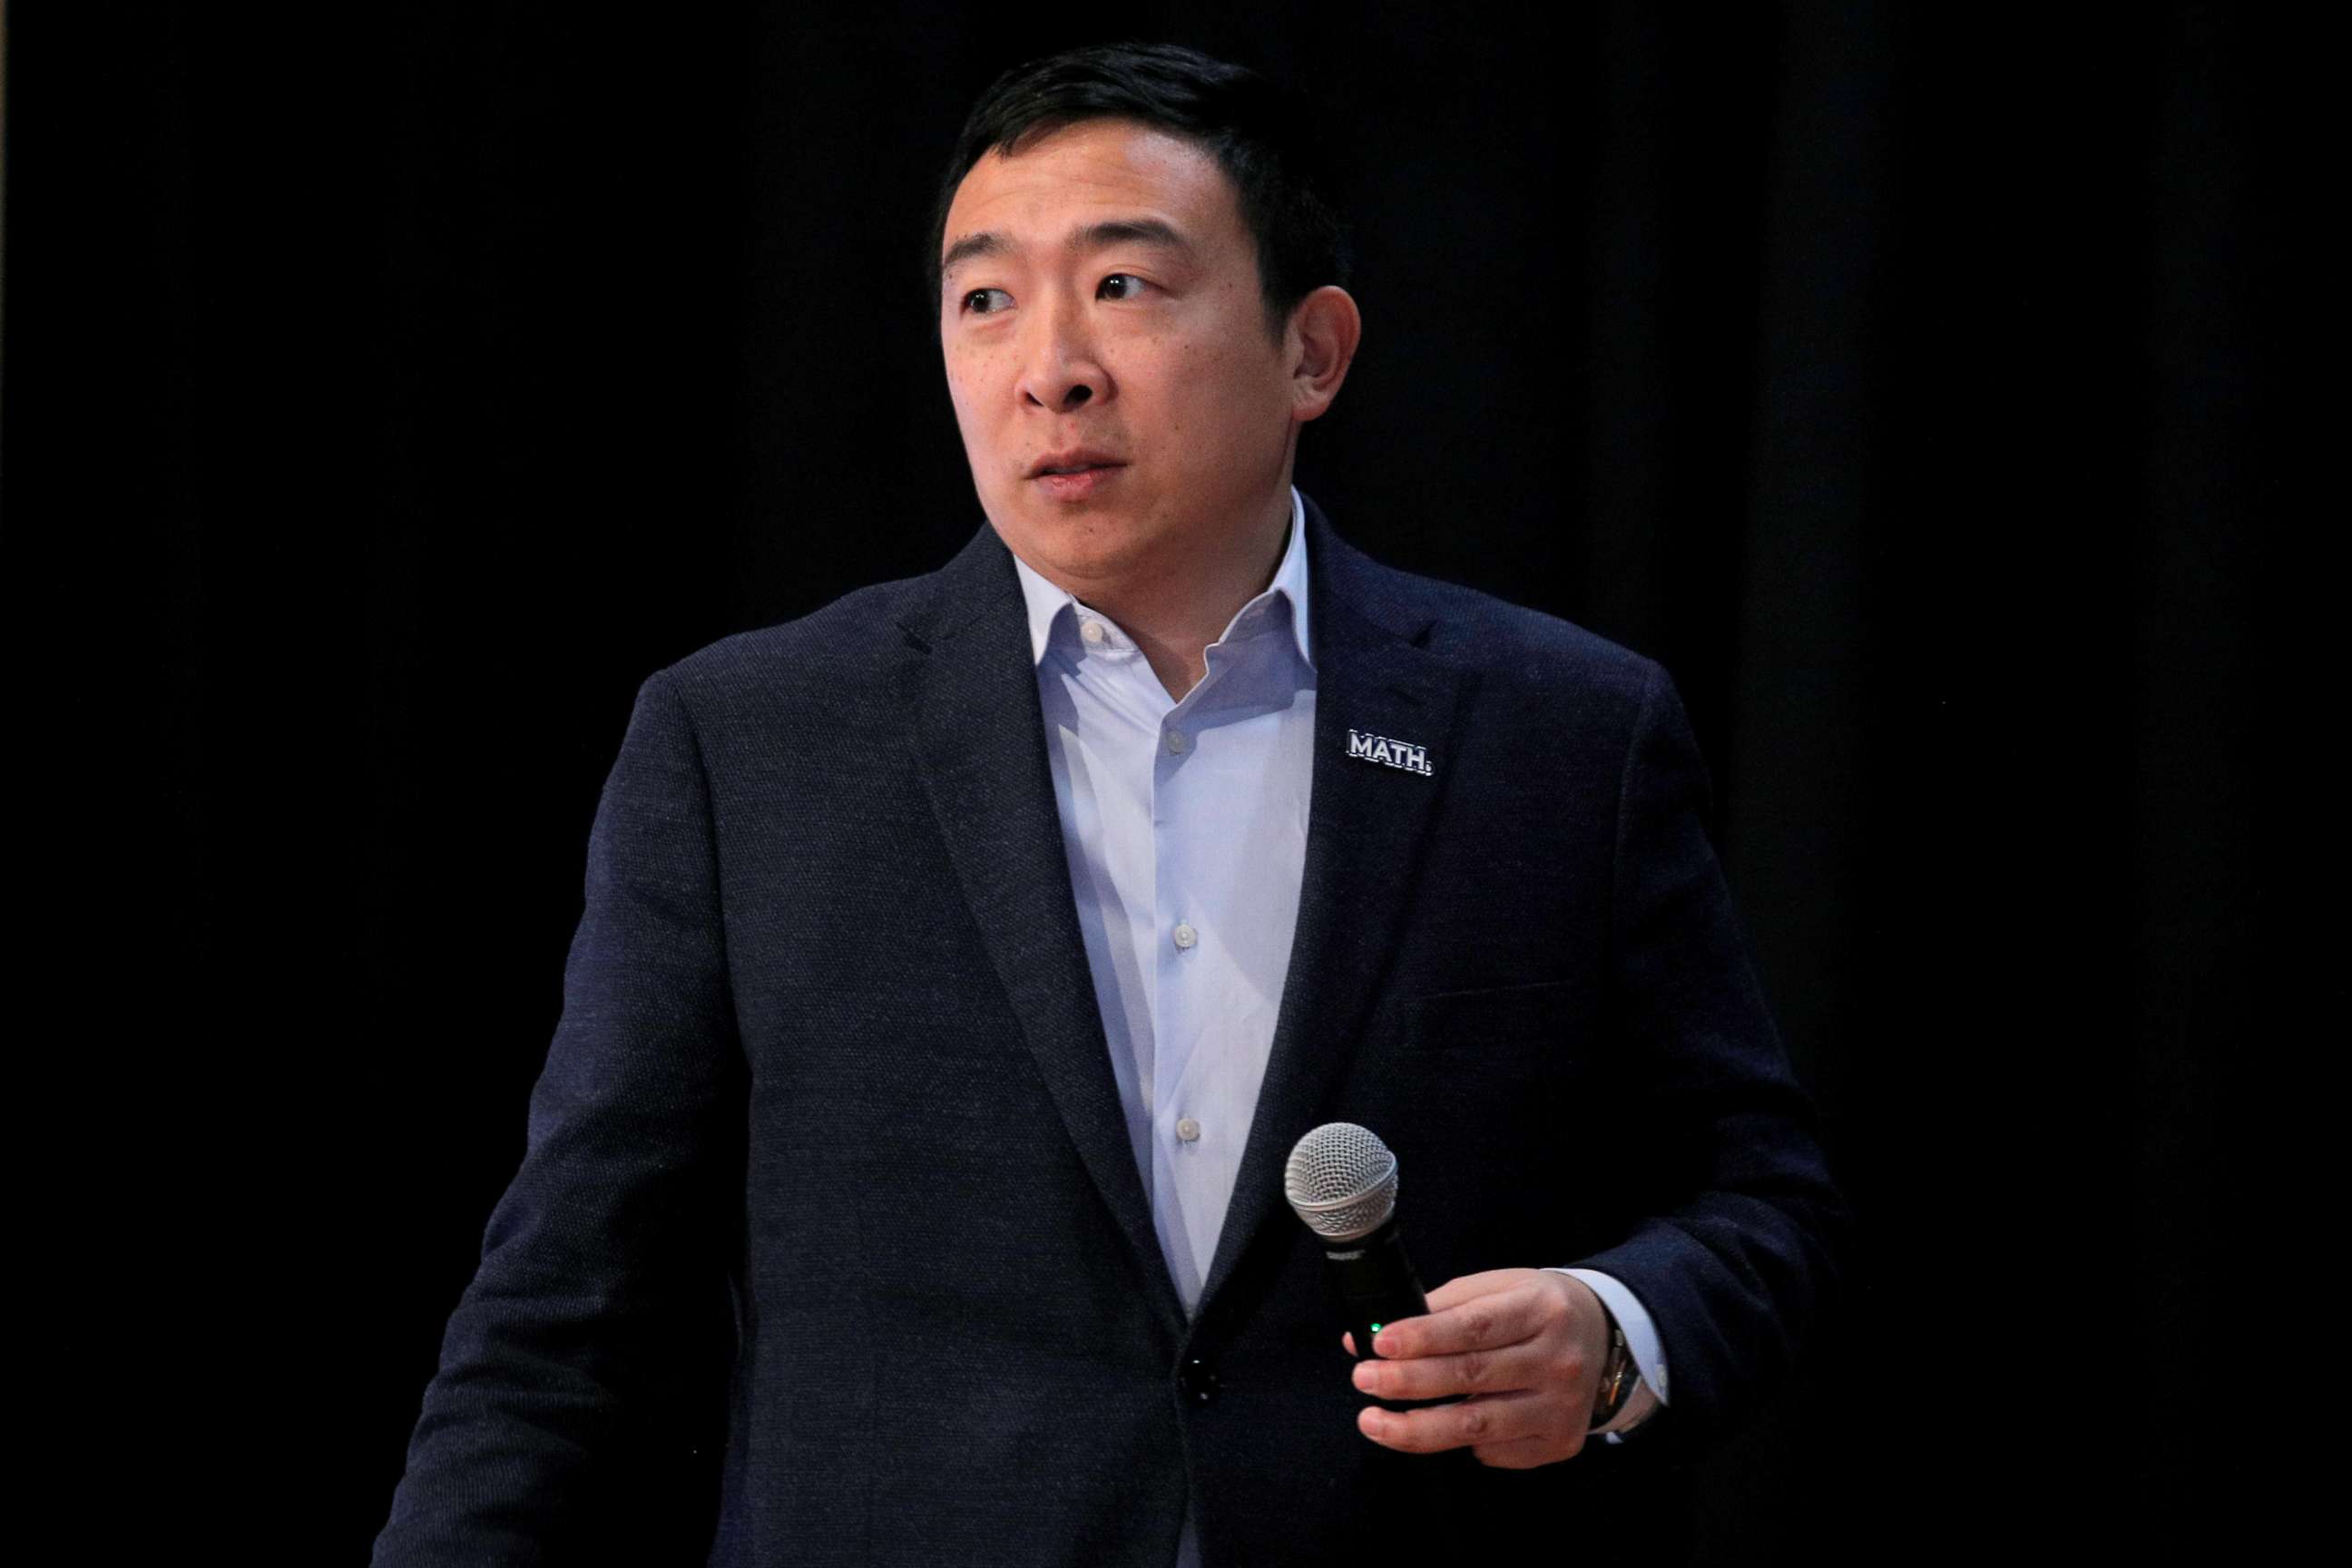 PHOTO: Democratic presidential candidate and entrepreneur Andrew Yang speaks during a campaign event in Milford, New Hampshire, Feb. 5, 2020.